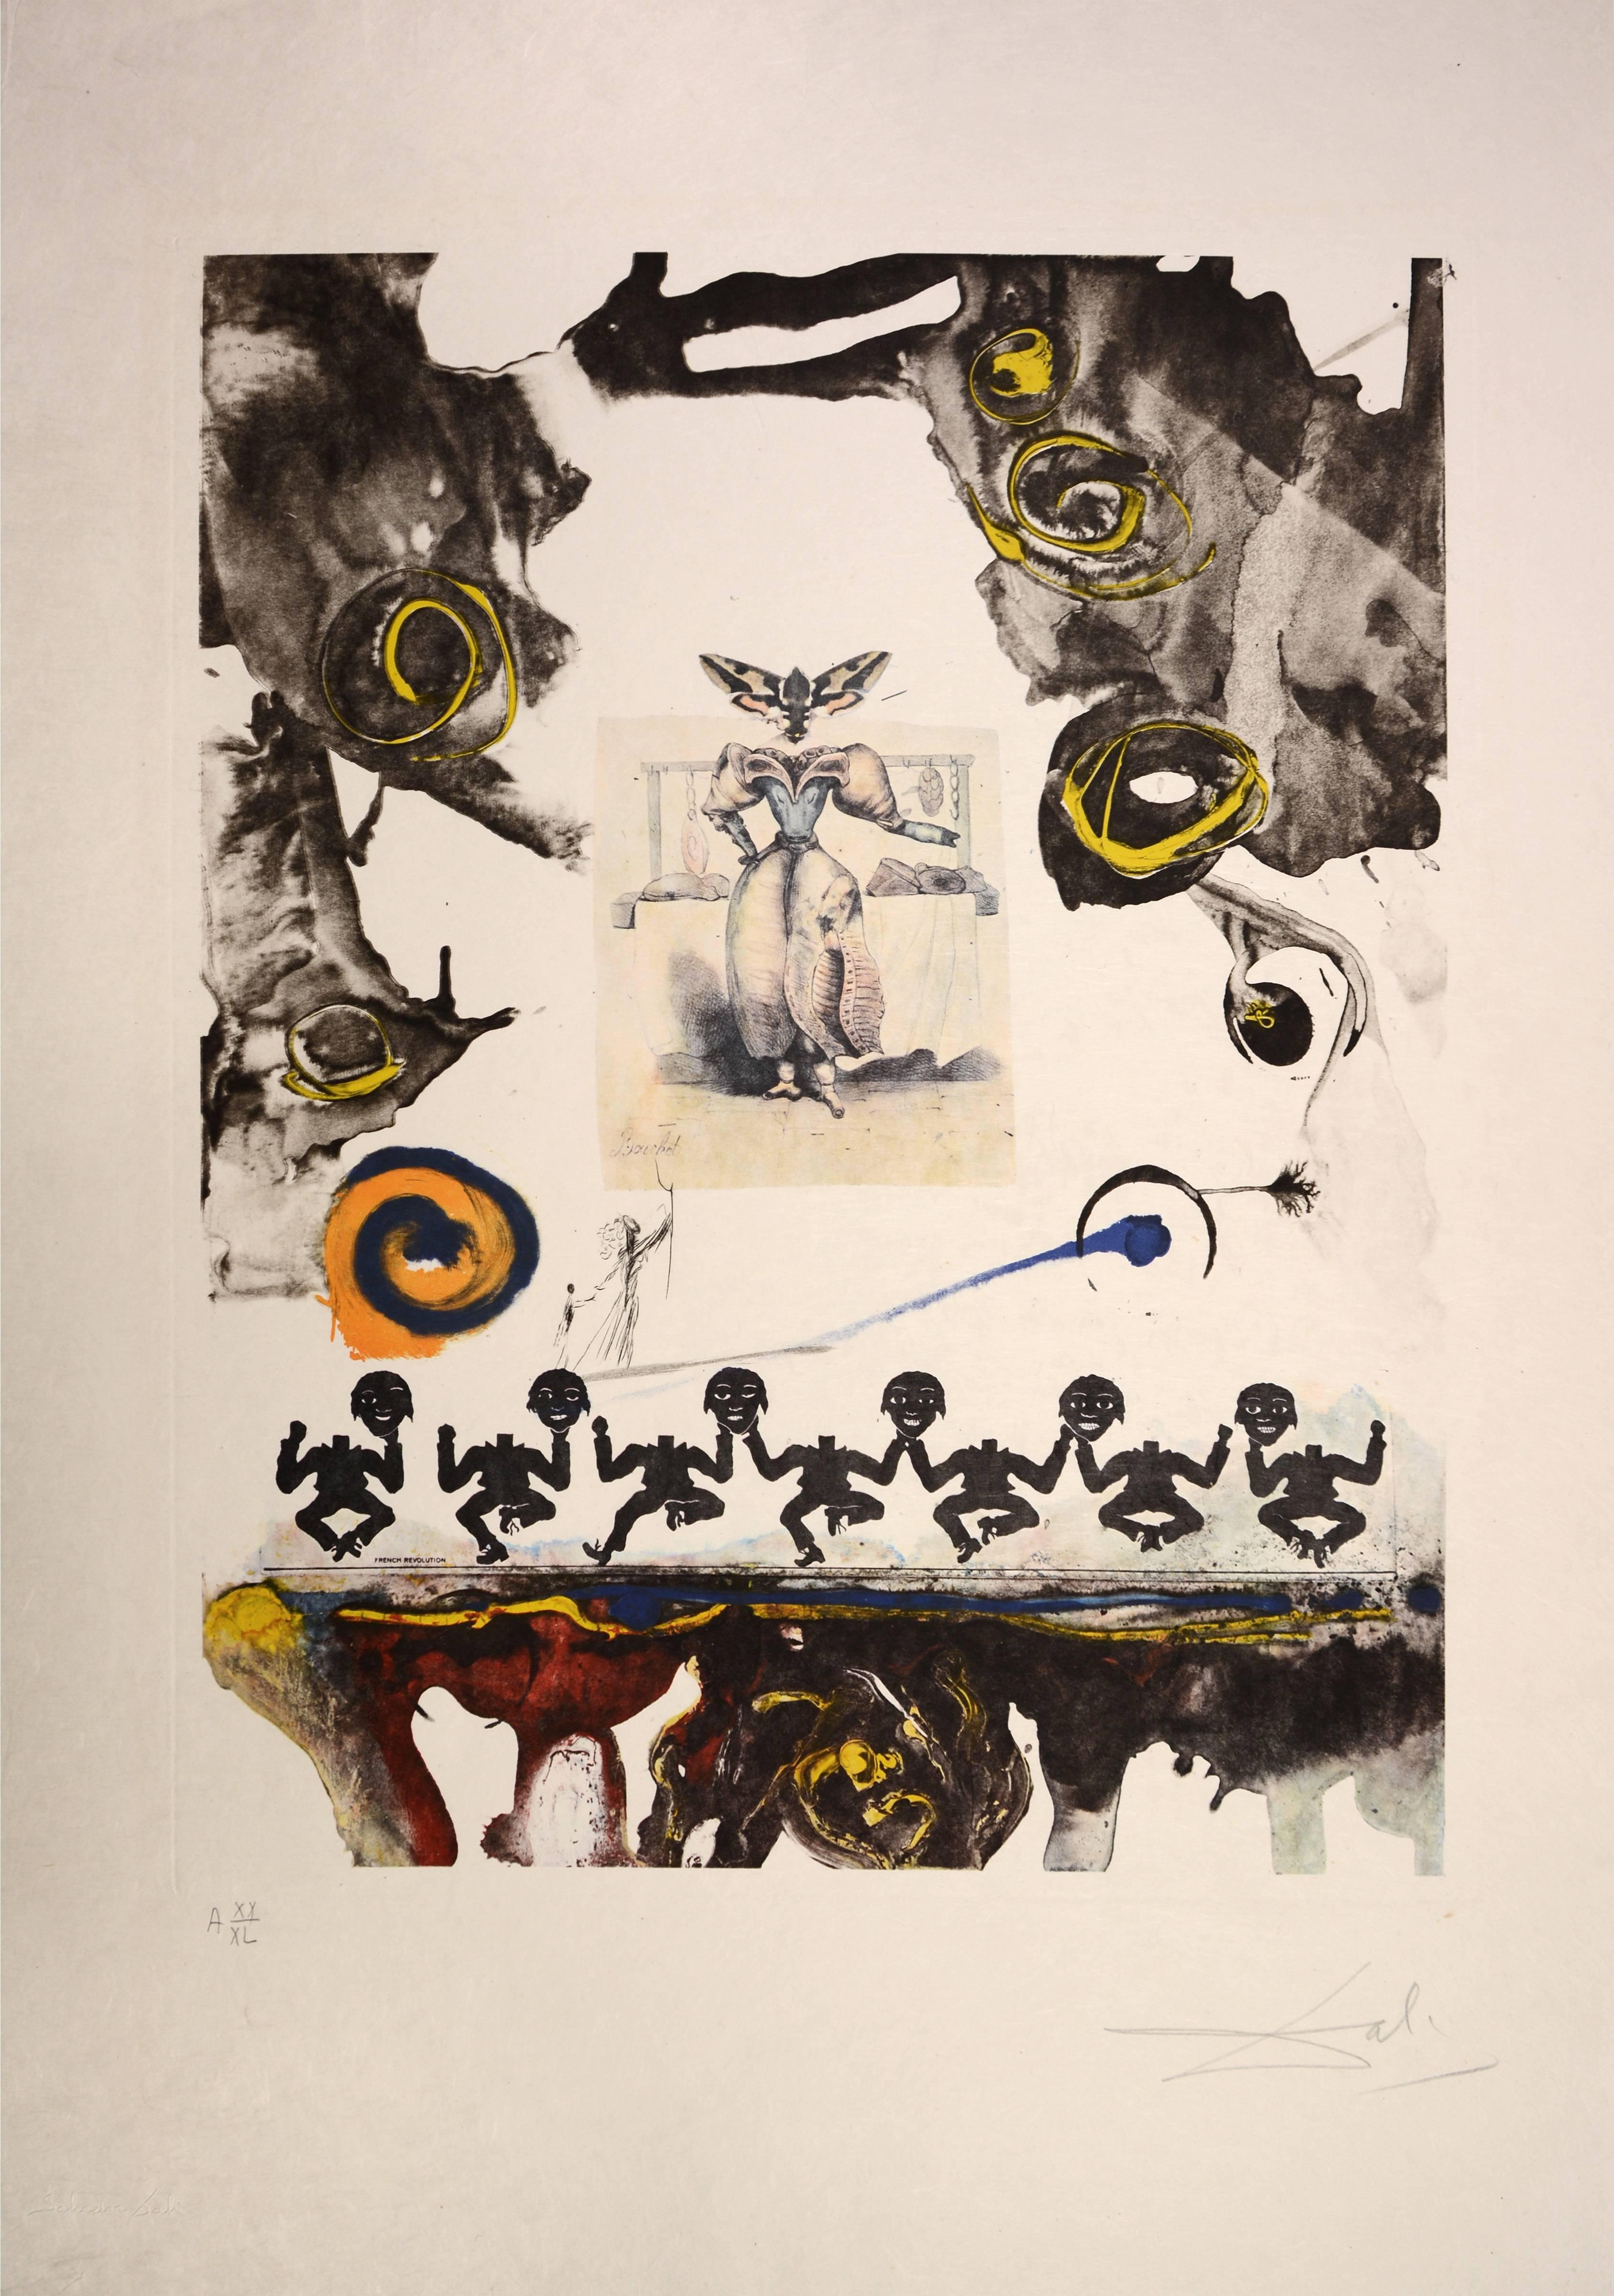 Surrealist Gastronomy, from Memories of Surrealism - Print by Salvador Dalí